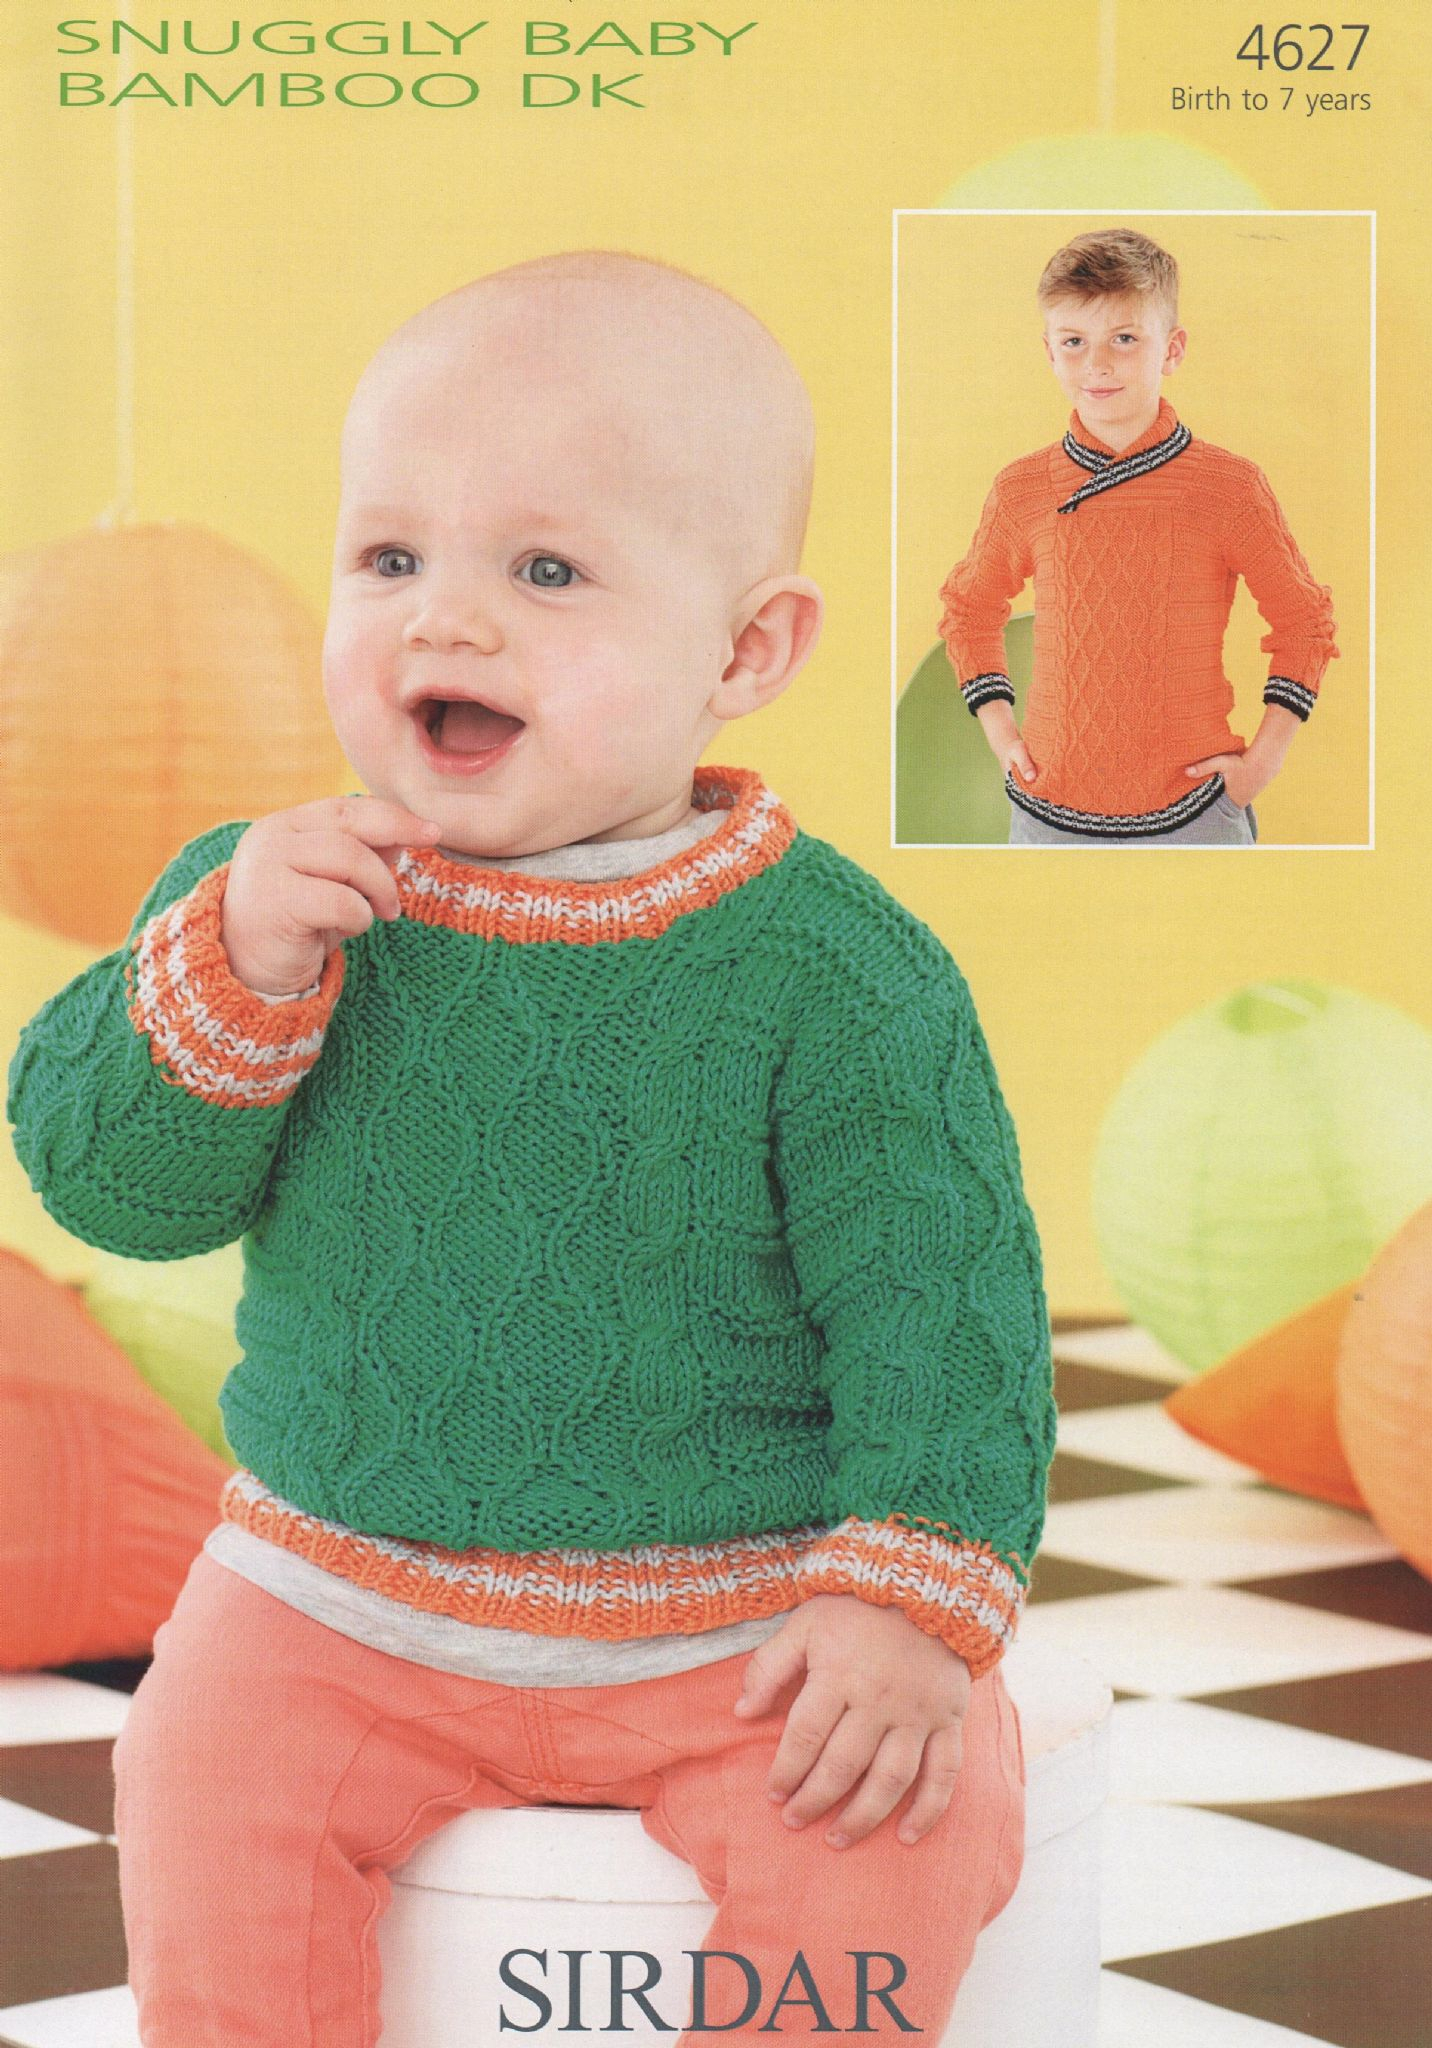 Sirdar Snuggly Knitting Patterns 4627 Sirdar Snuggly Ba Bamboo Dk Sweater Knitting Pattern To Fit Birth To 7 Years